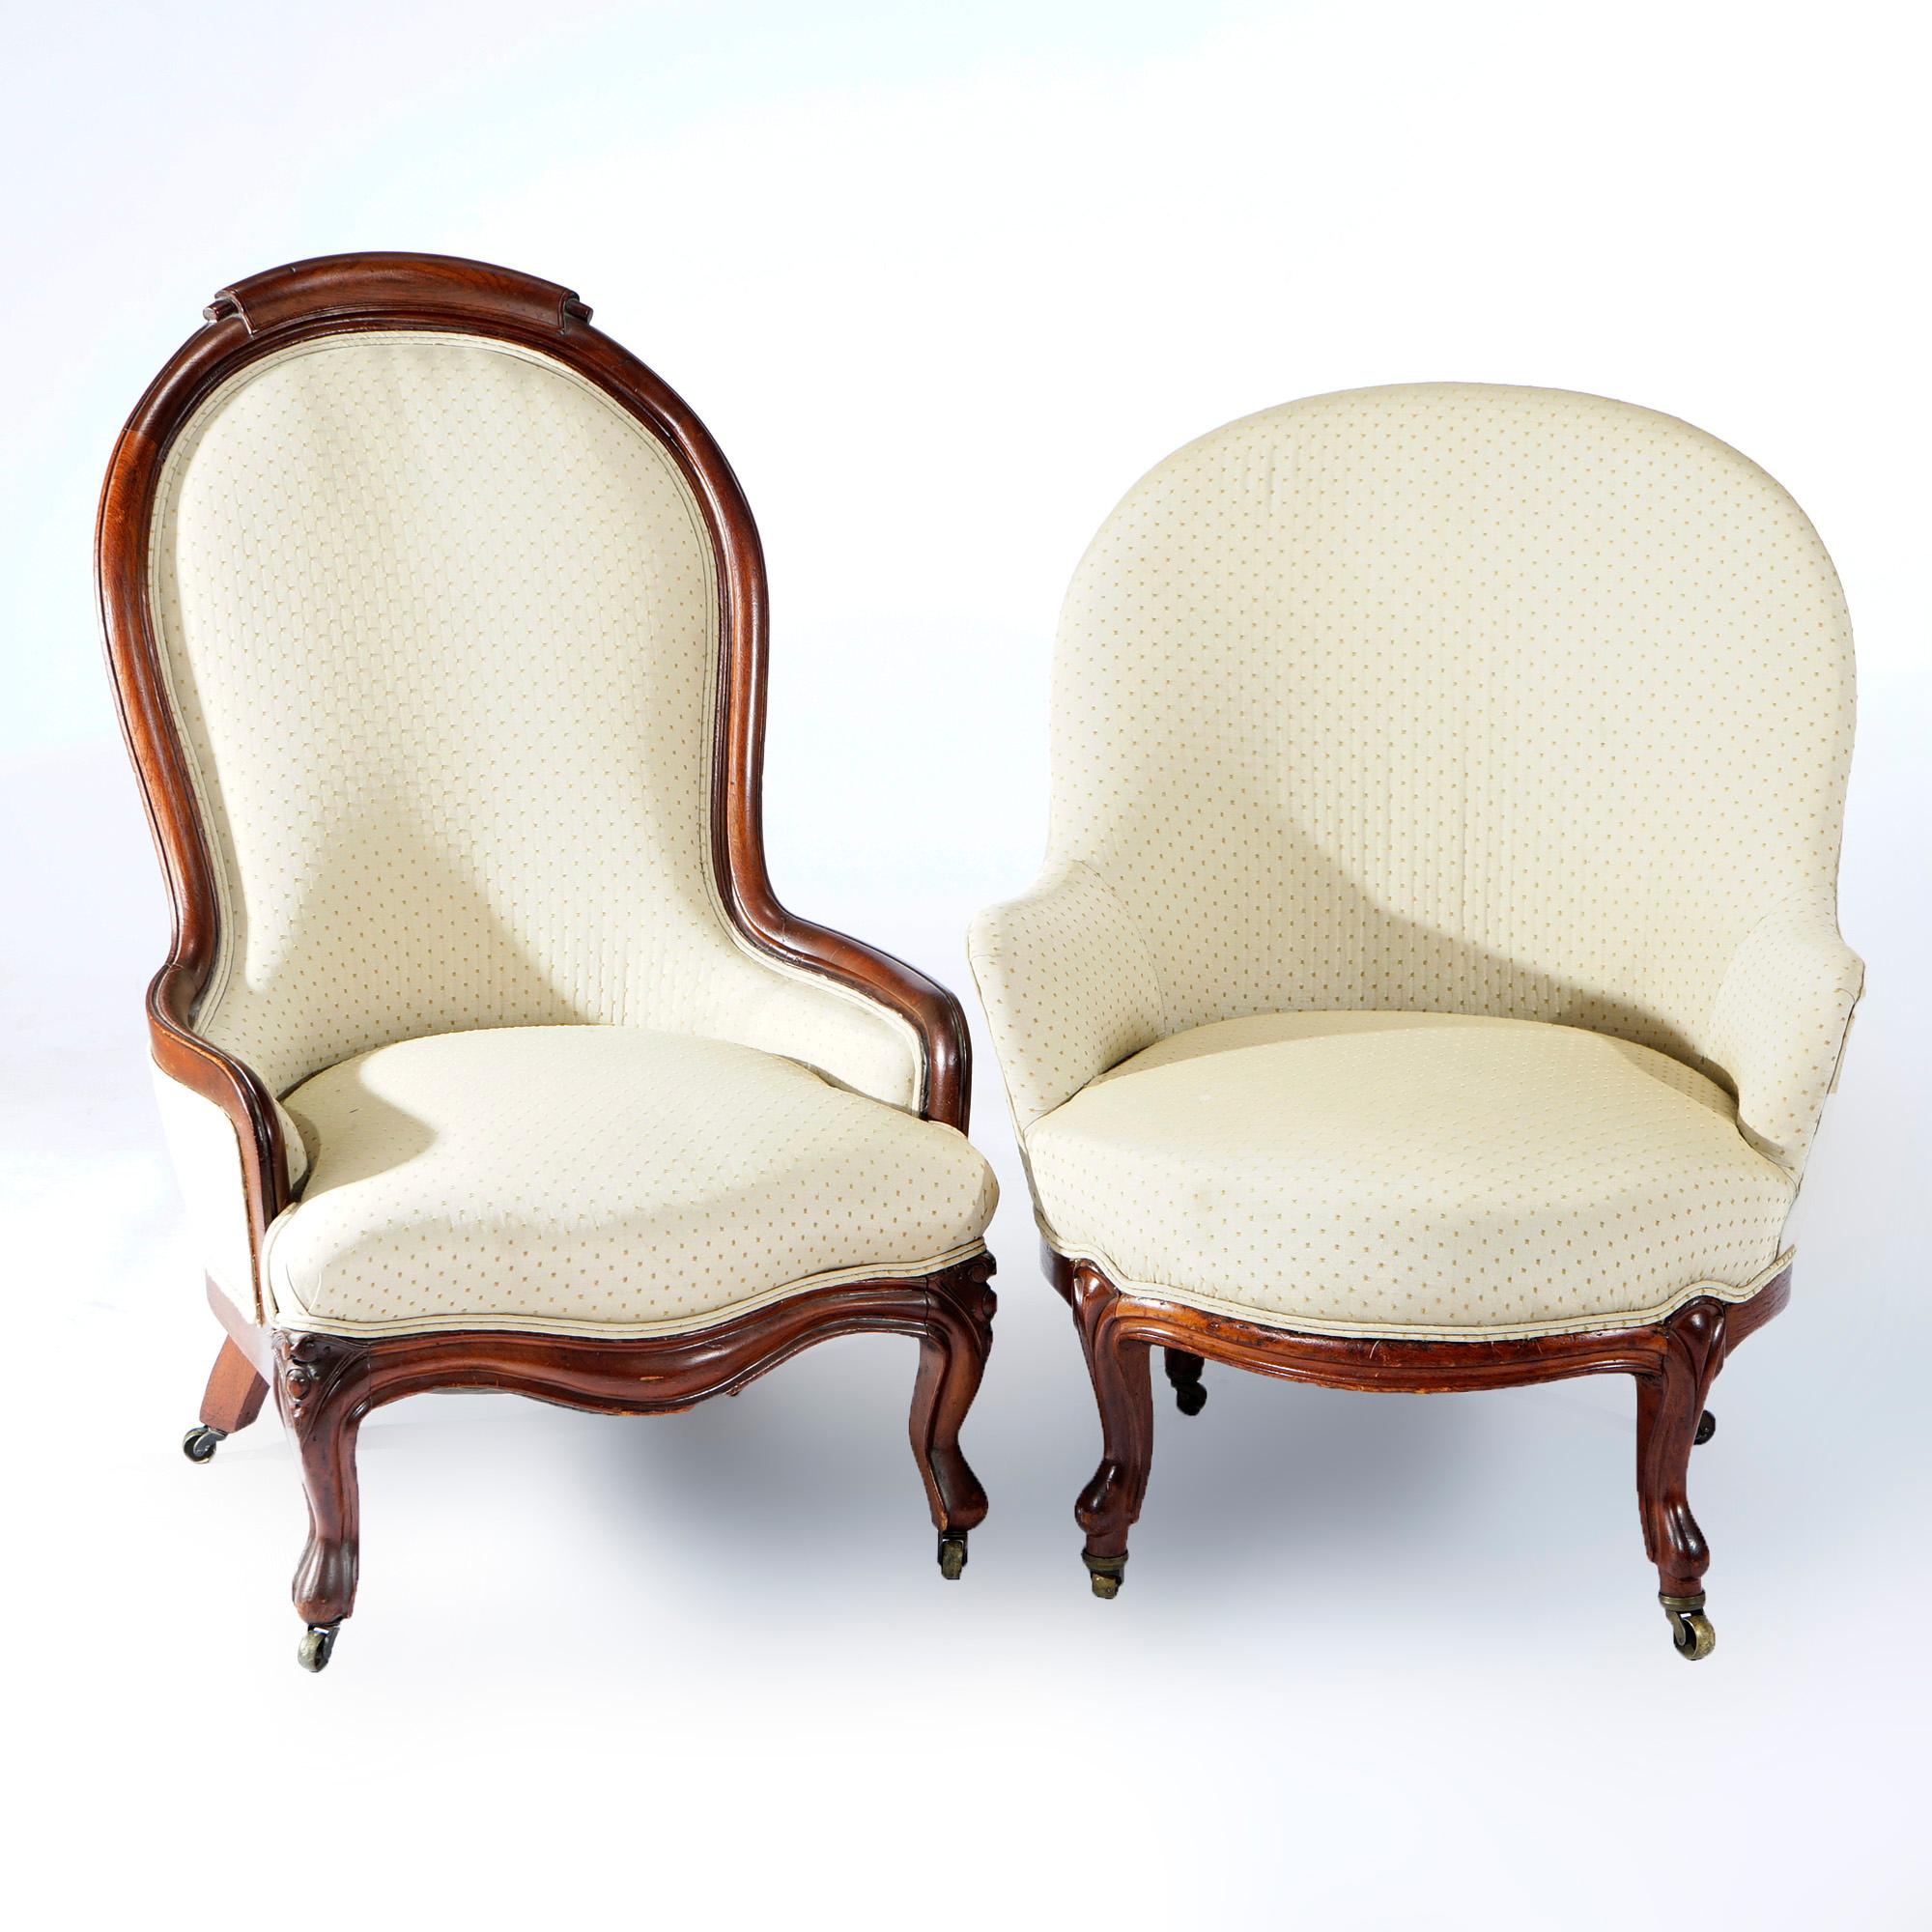 An antique pair of Victorian parlor chairs offer walnut construction with upholstered seats and back raised on cabriole legs with carved knees, c1900

Measures- 40.25''H x 25''W x 27.75''D